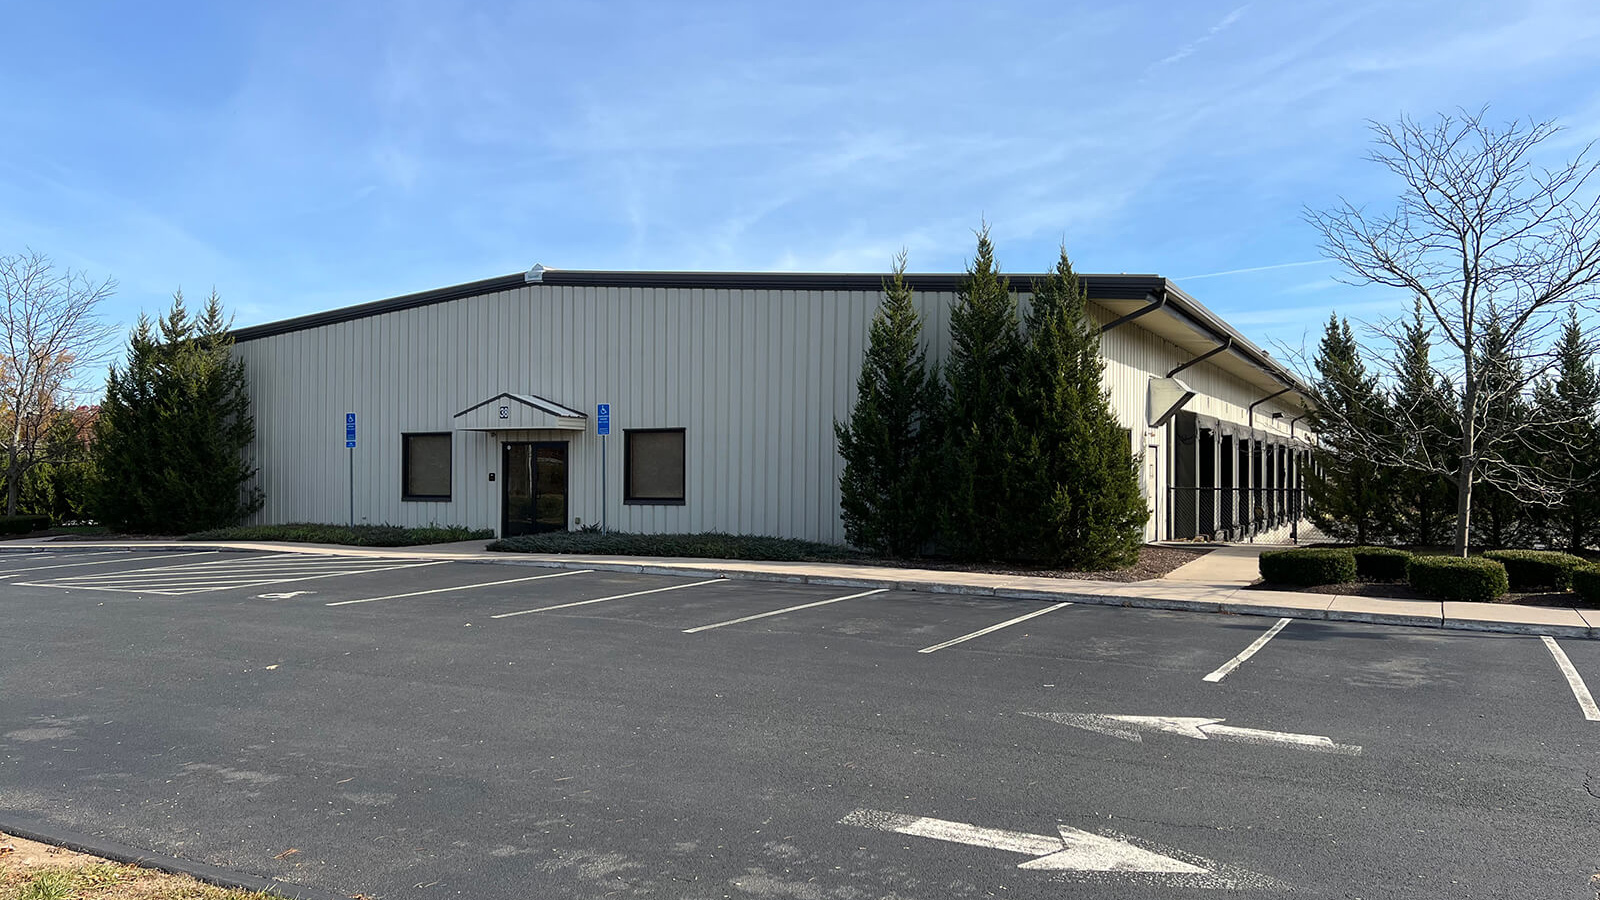 32 Kripes Road, E Granby, Connecticut 06026, Industrial,For Lease,Kripes Road,1362